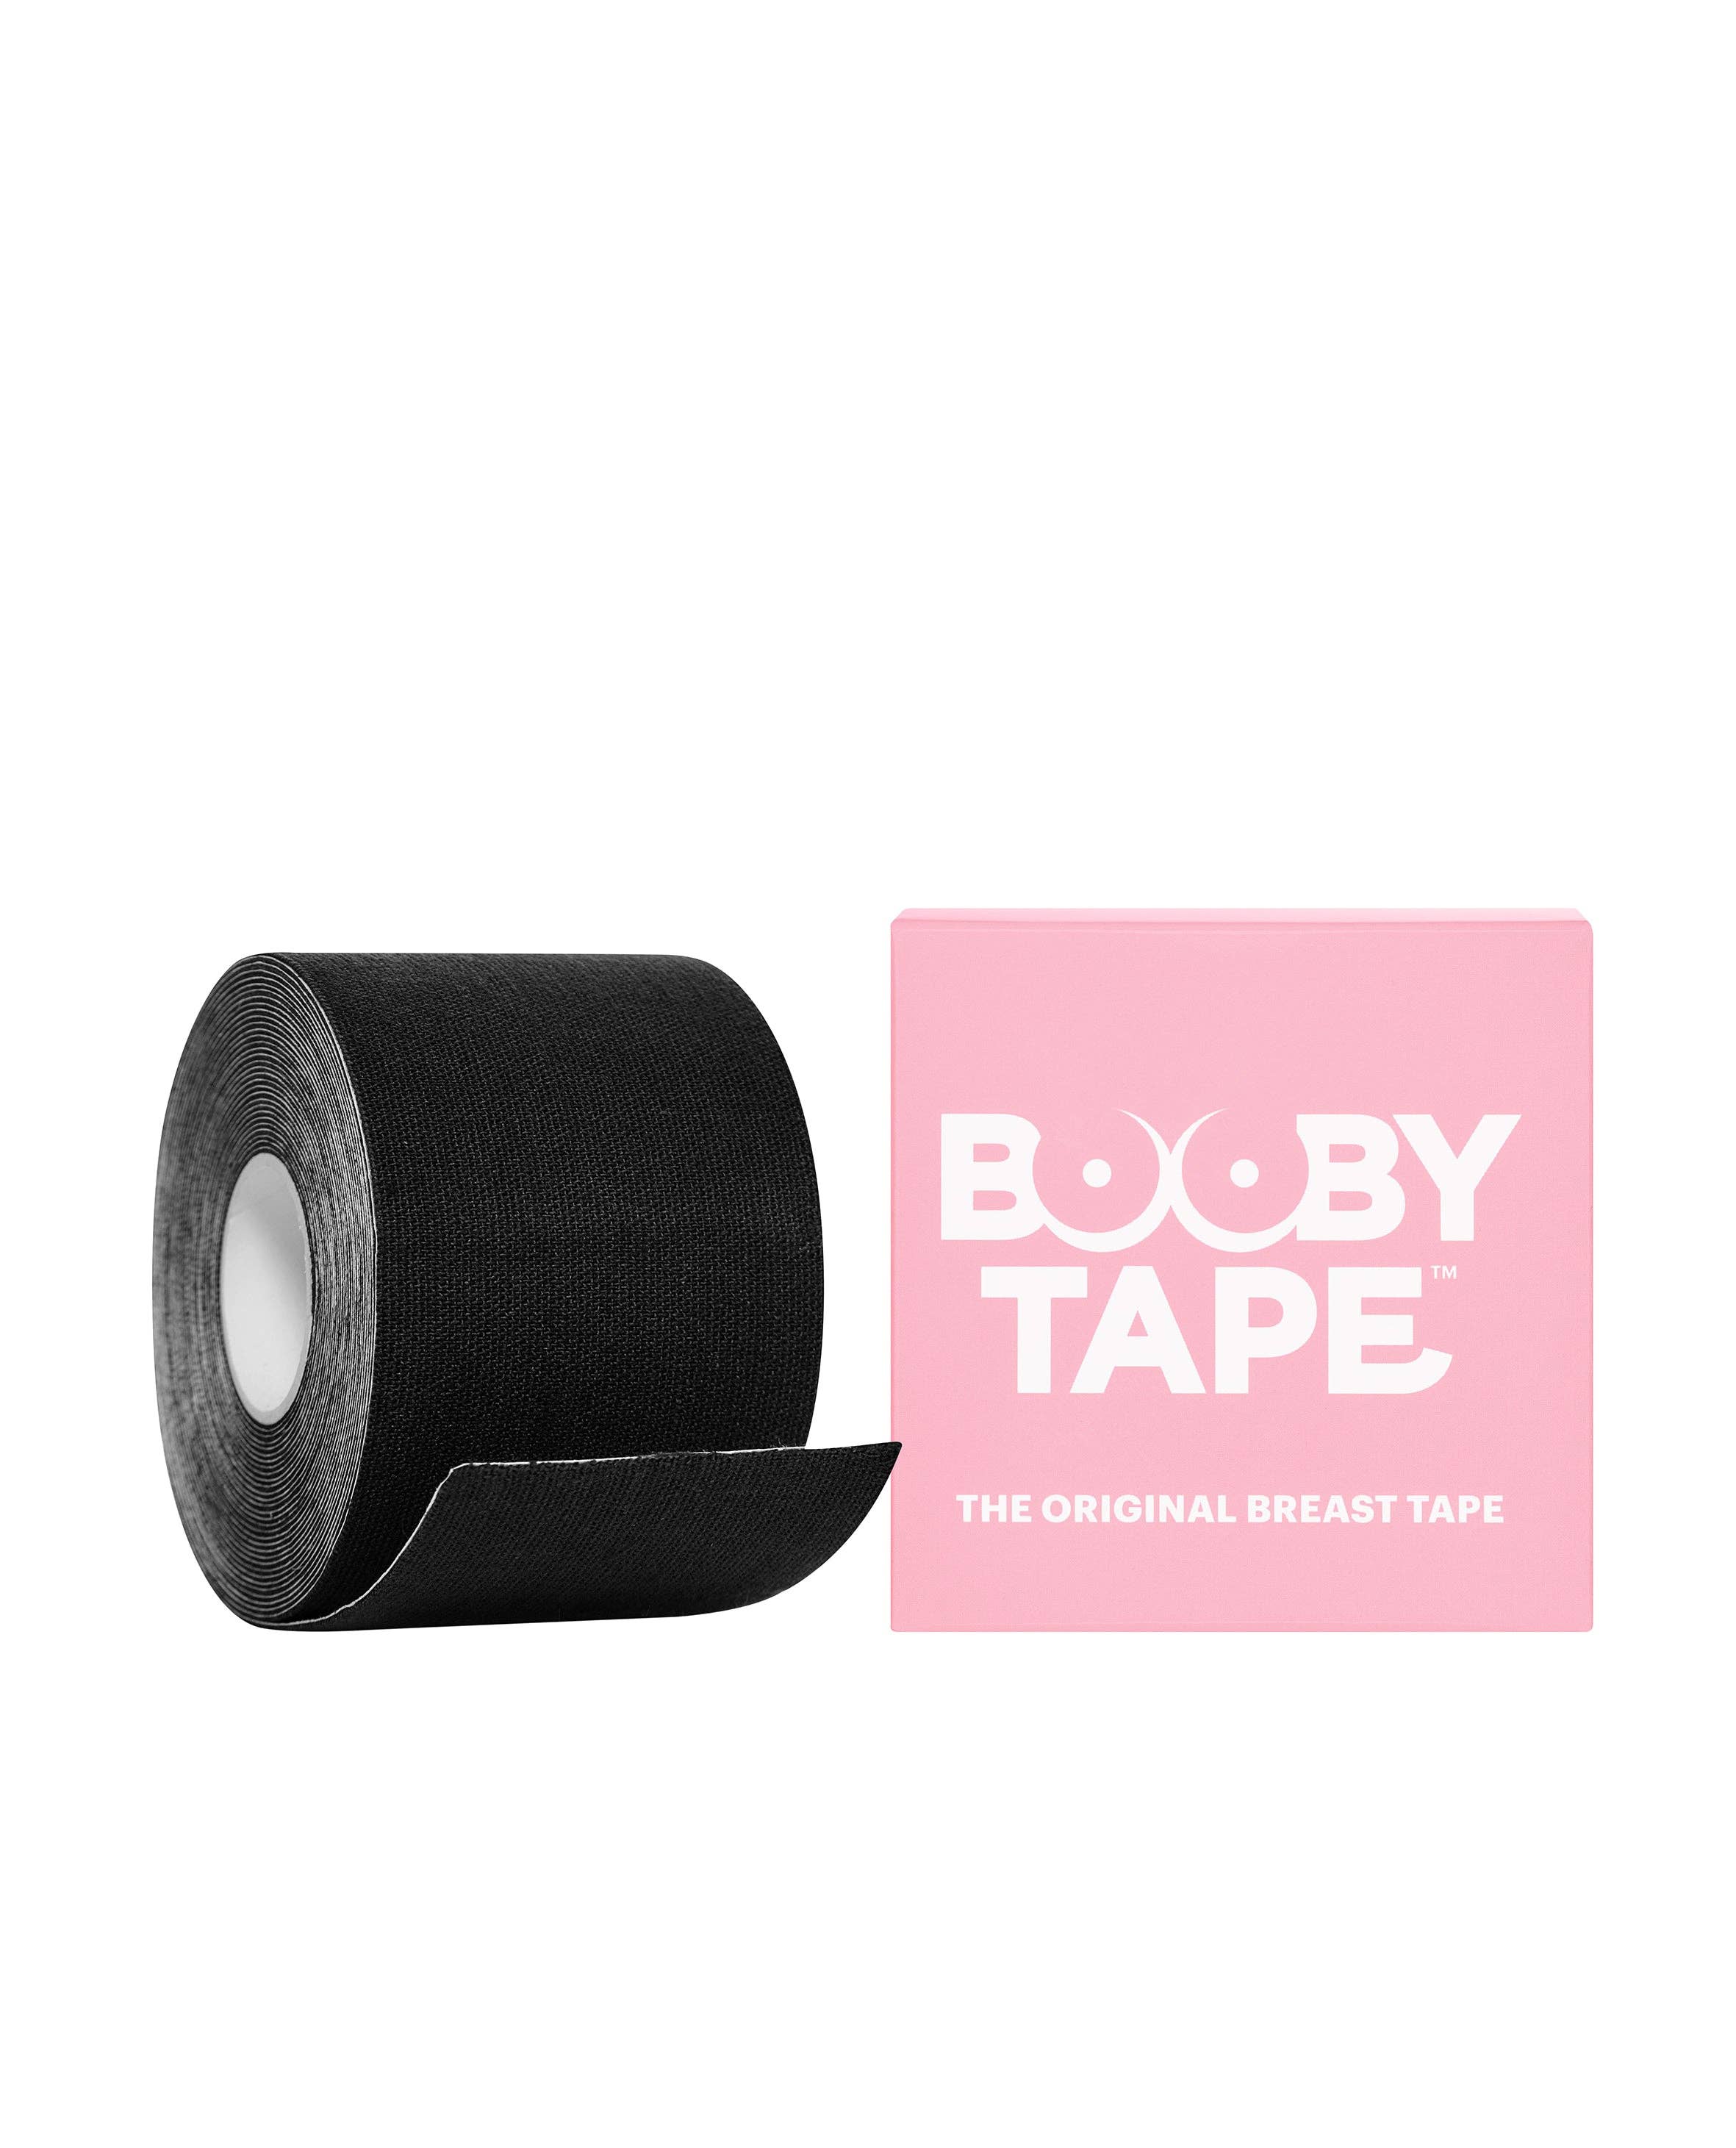 Booby Tape wholesale products